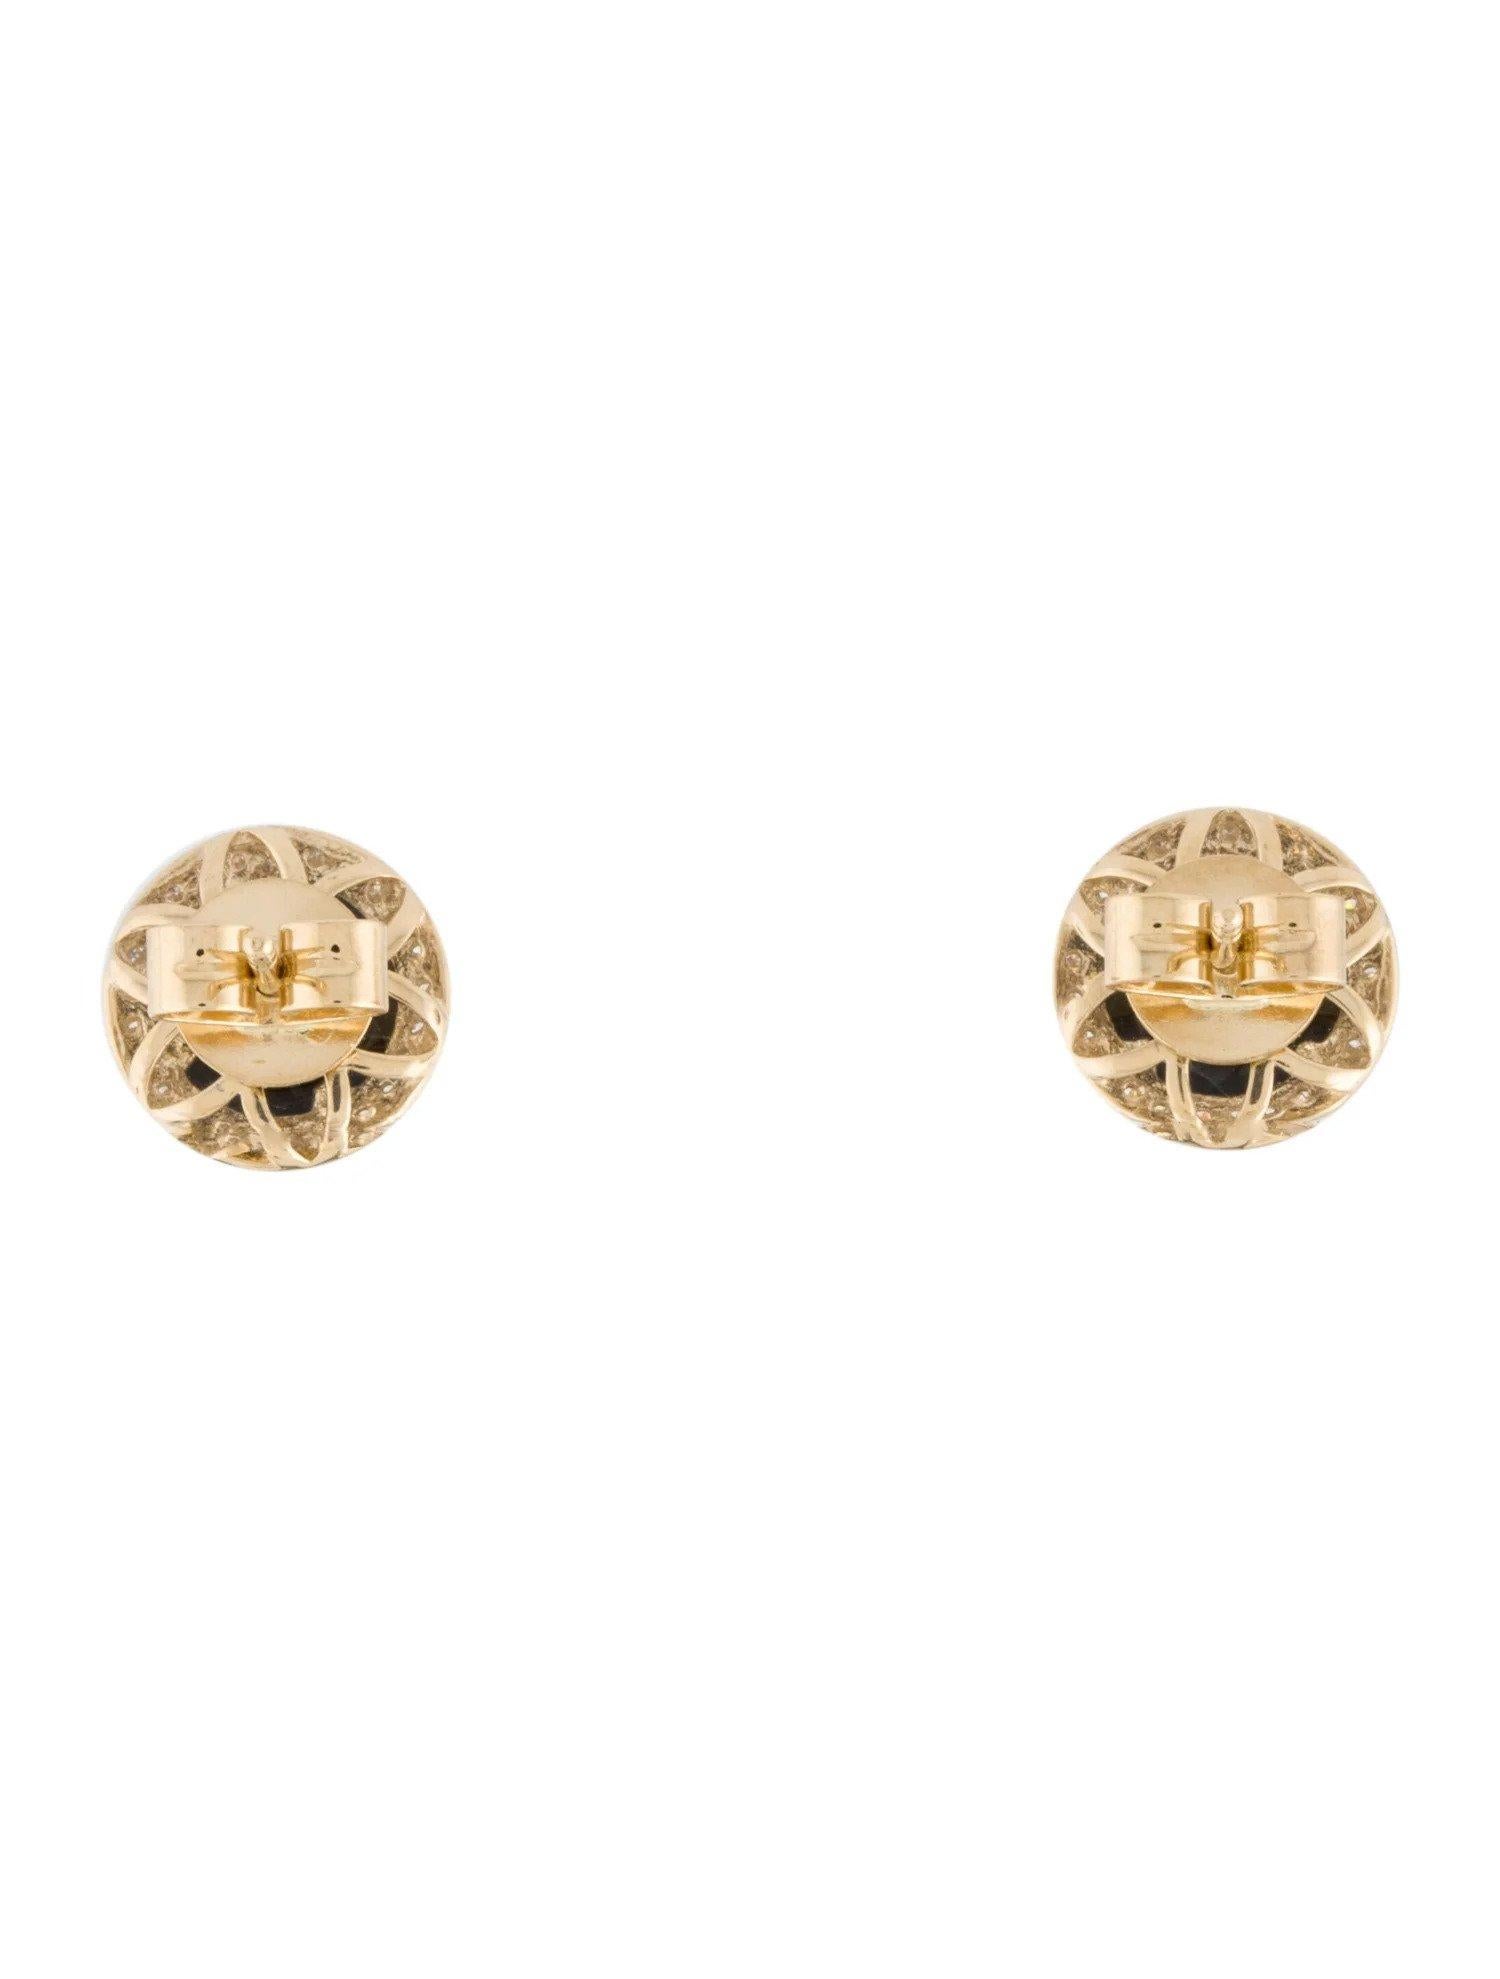 1.89 Carat Round Black Onyx & Diamond Yellow Gold Stud Earrings  In New Condition For Sale In Great Neck, NY